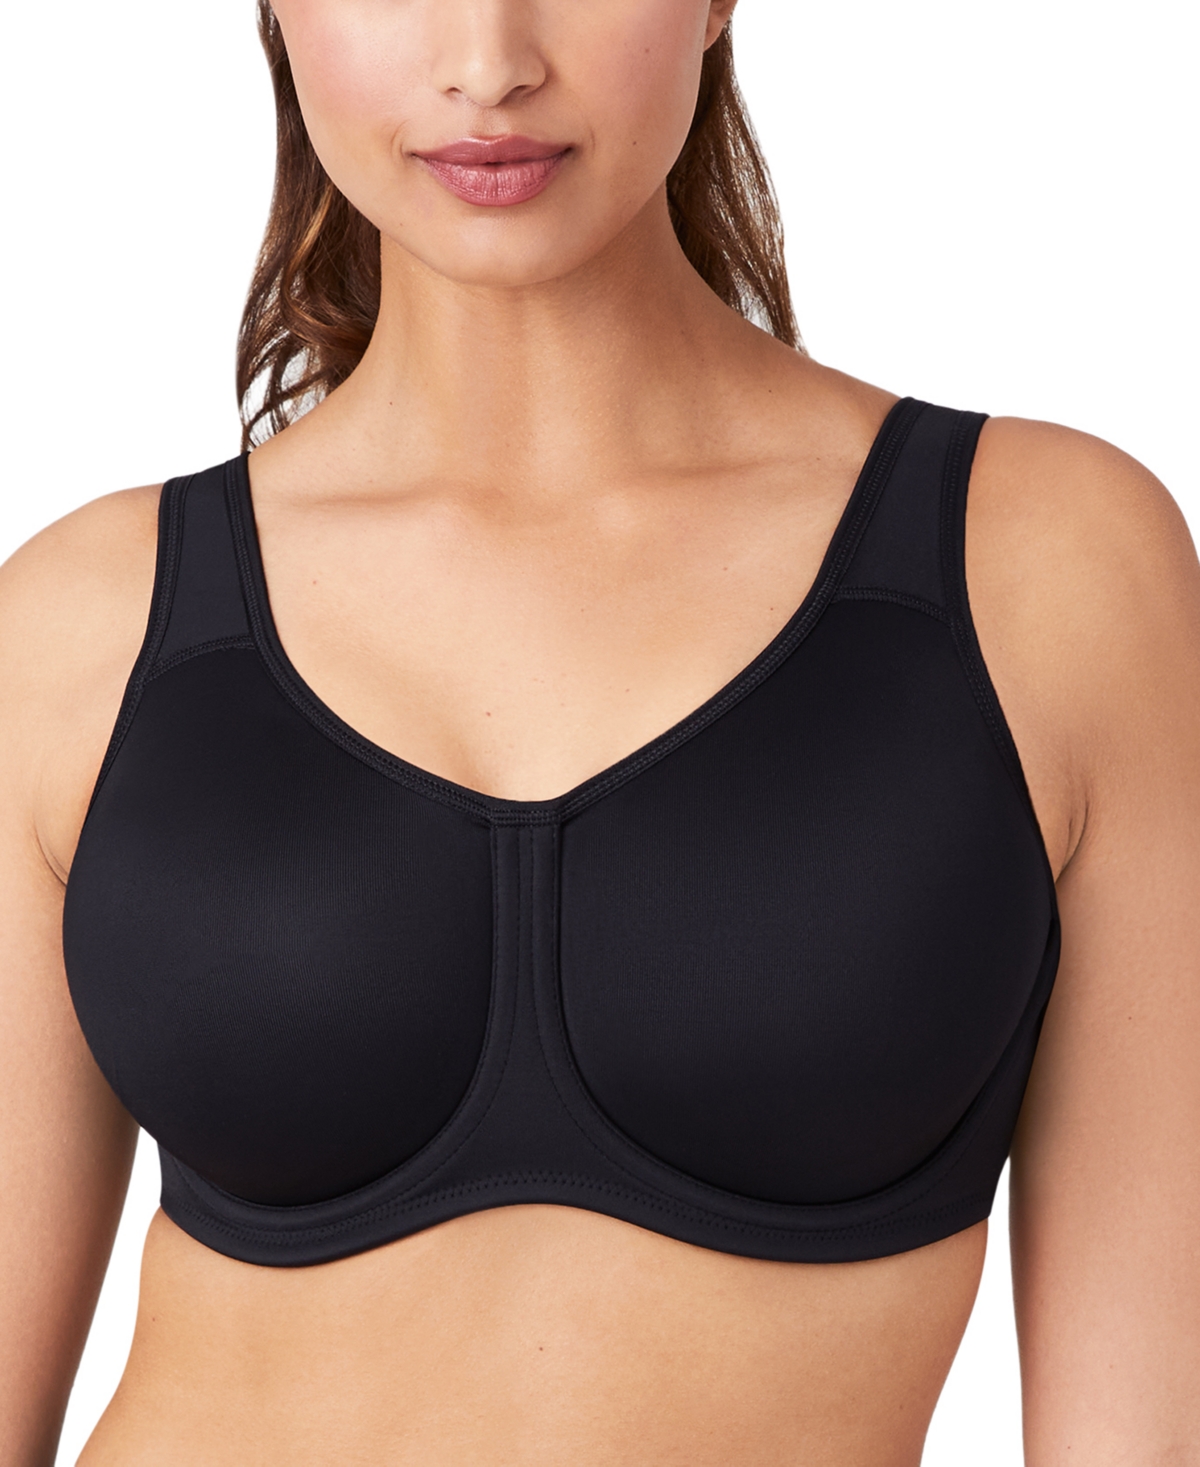 UPC 012214941093 product image for Wacoal Sport High-Impact Underwire Bra 855170, Up To I Cup | upcitemdb.com